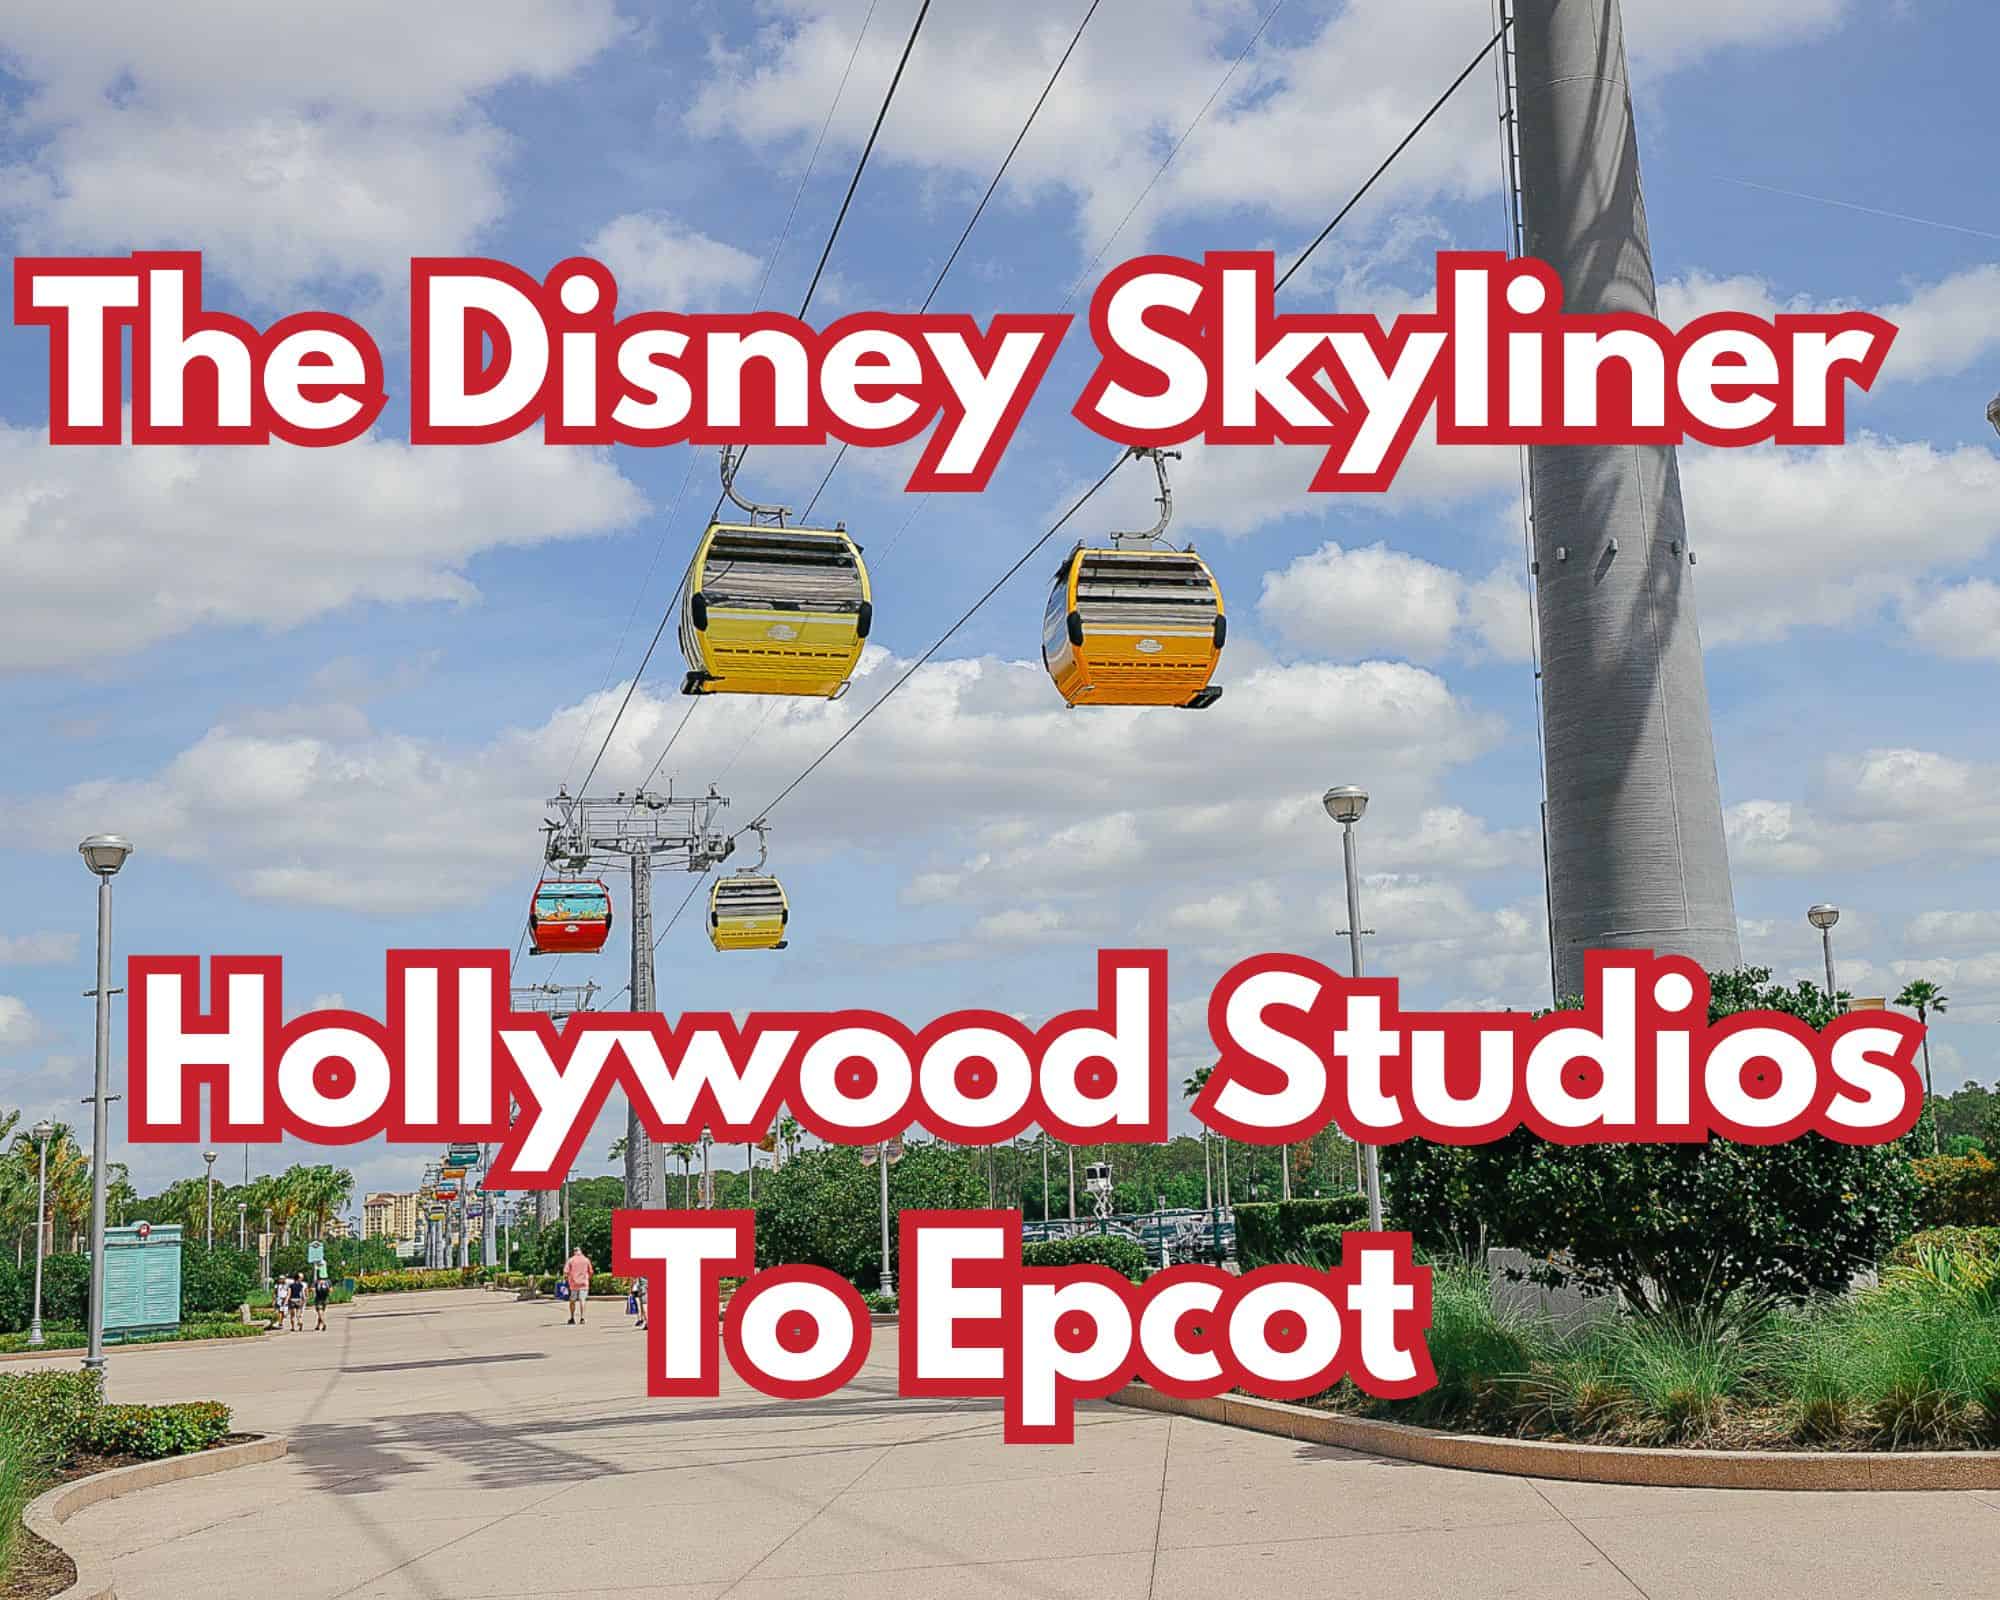 The Disney Skyliner Hollywood Studios to Epcot